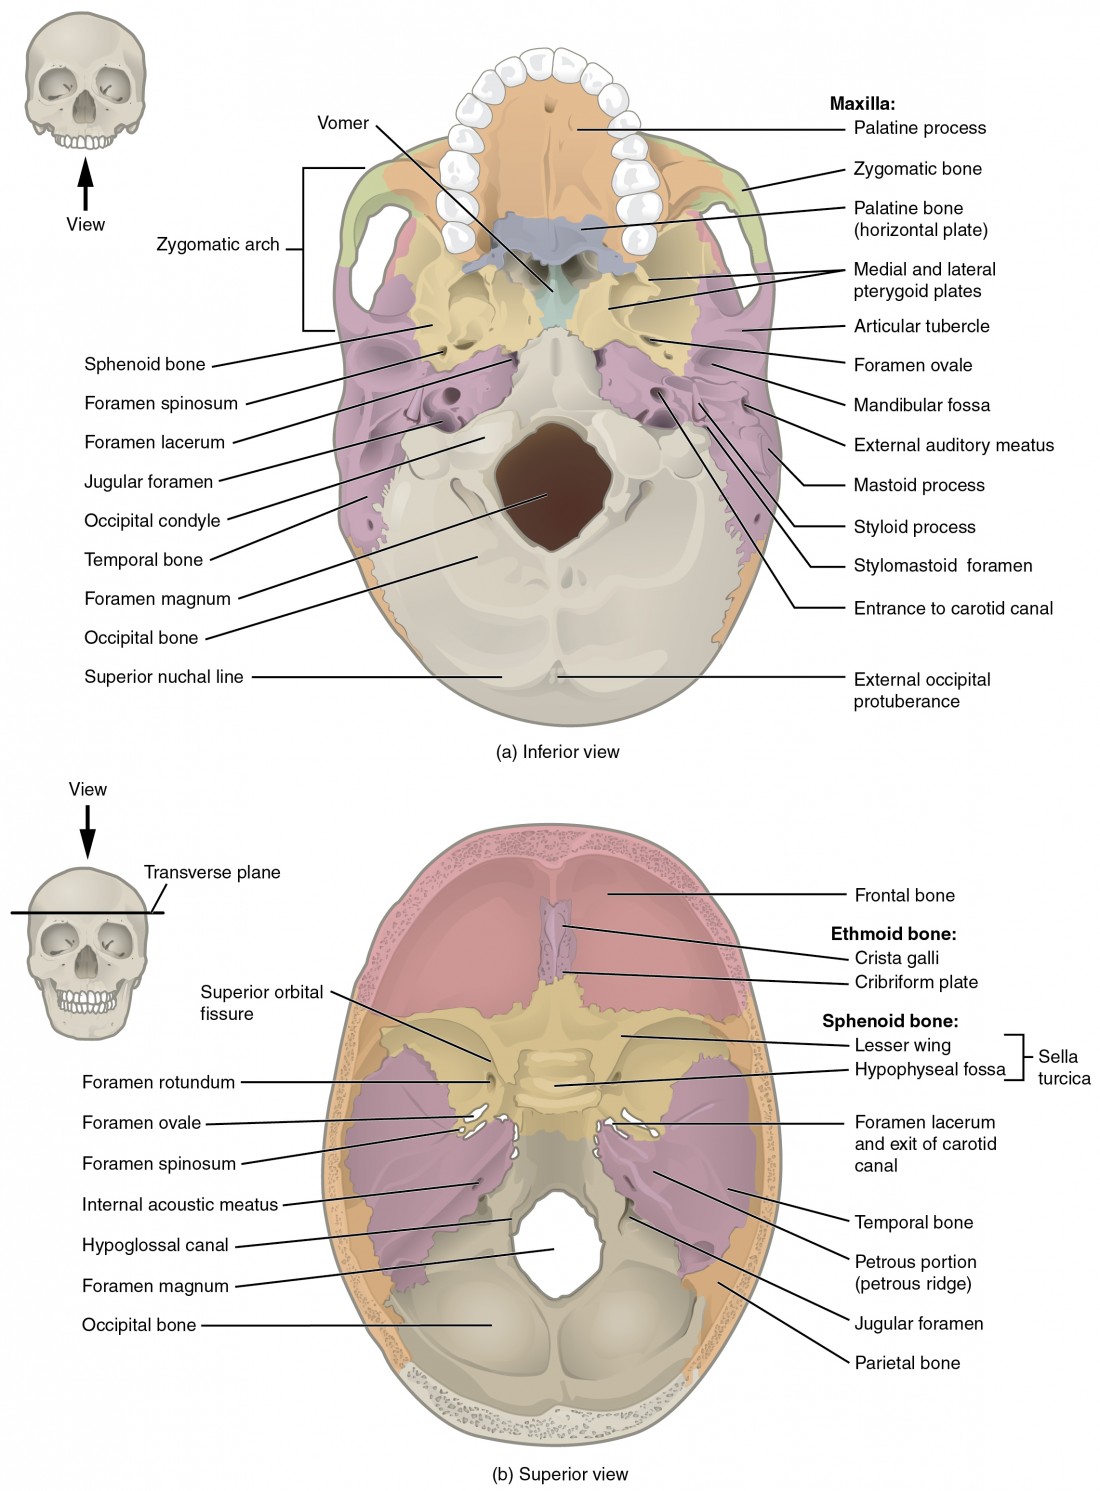 The Skull Anatomy And Physiology Course Hero 2584